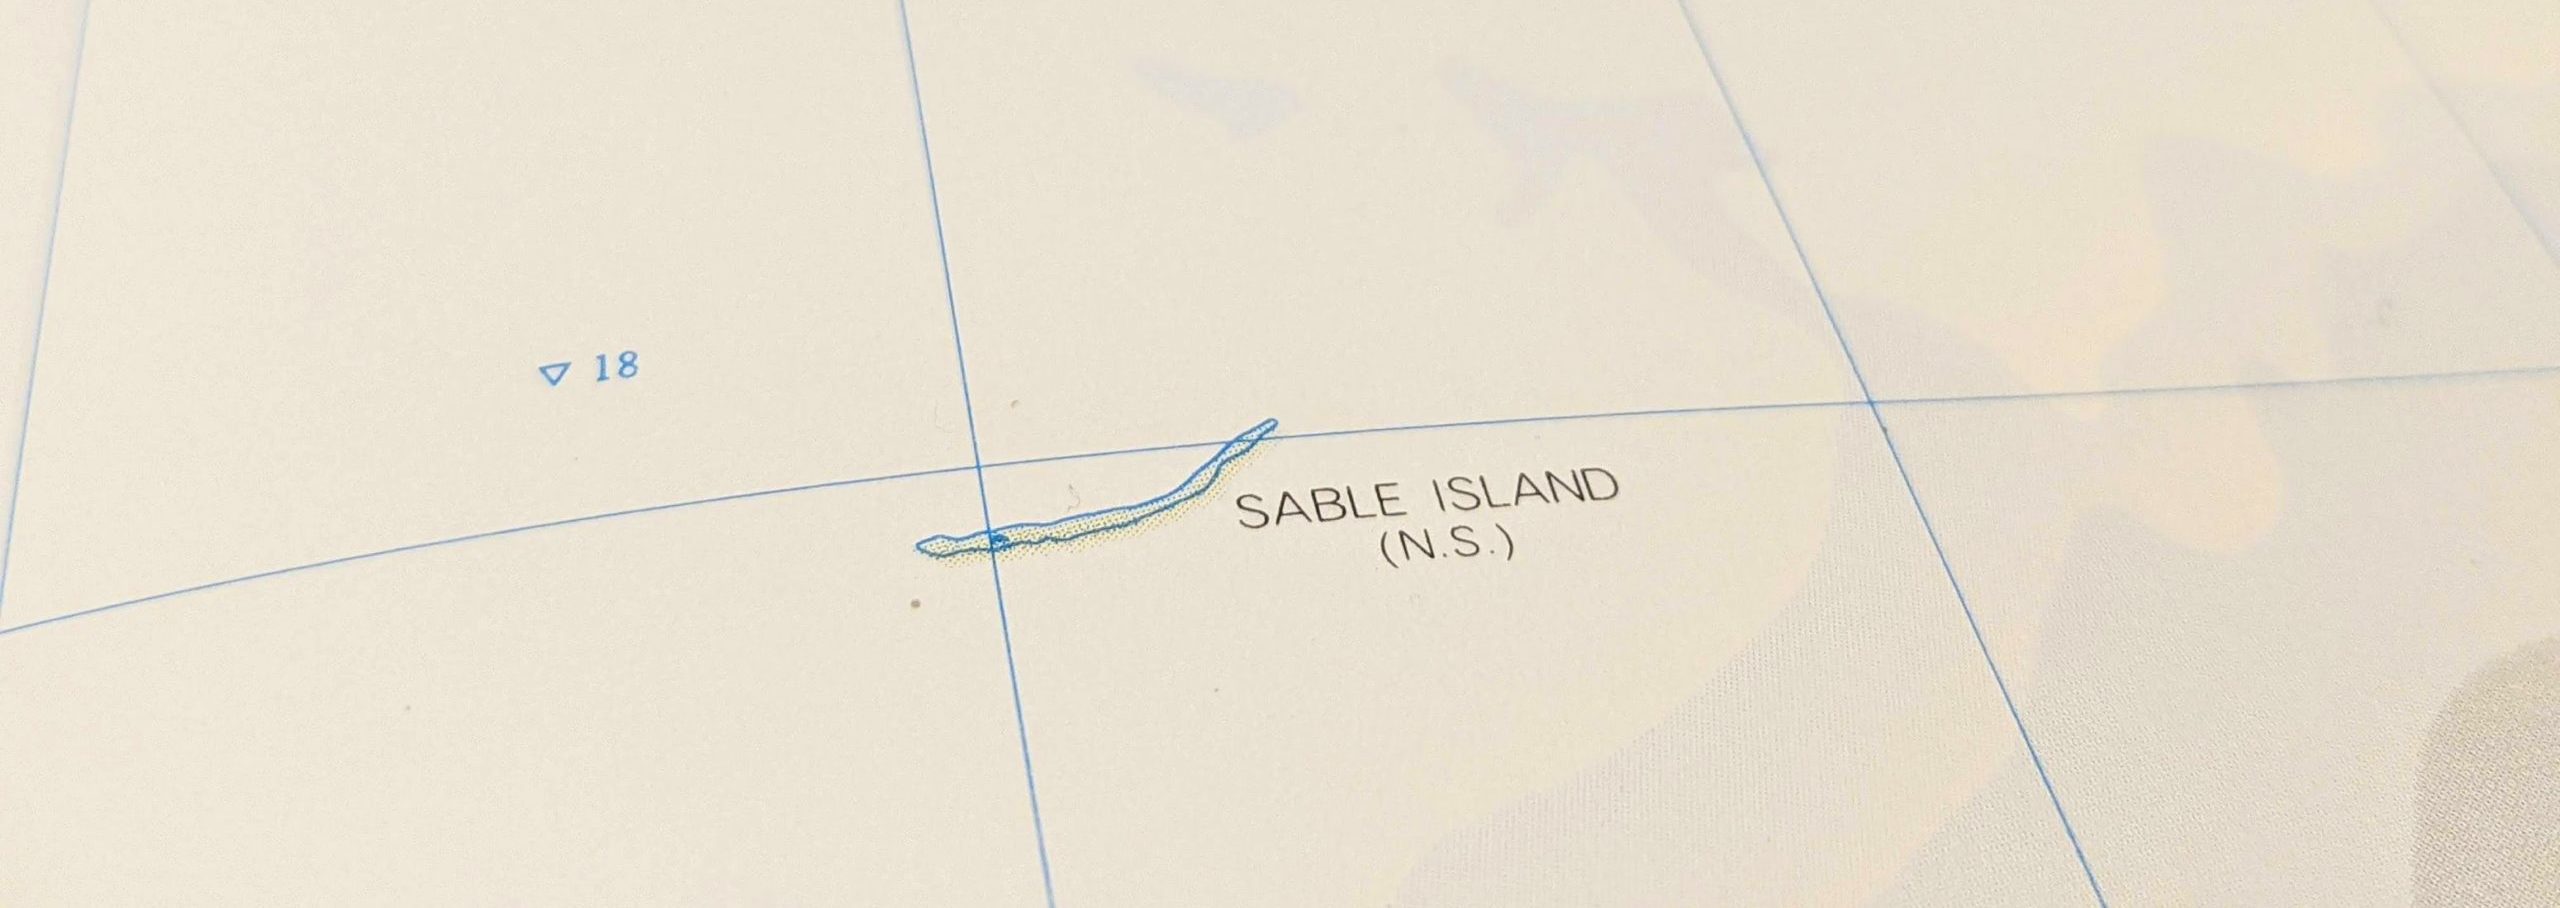 Picture of Sable Island in an atlas.